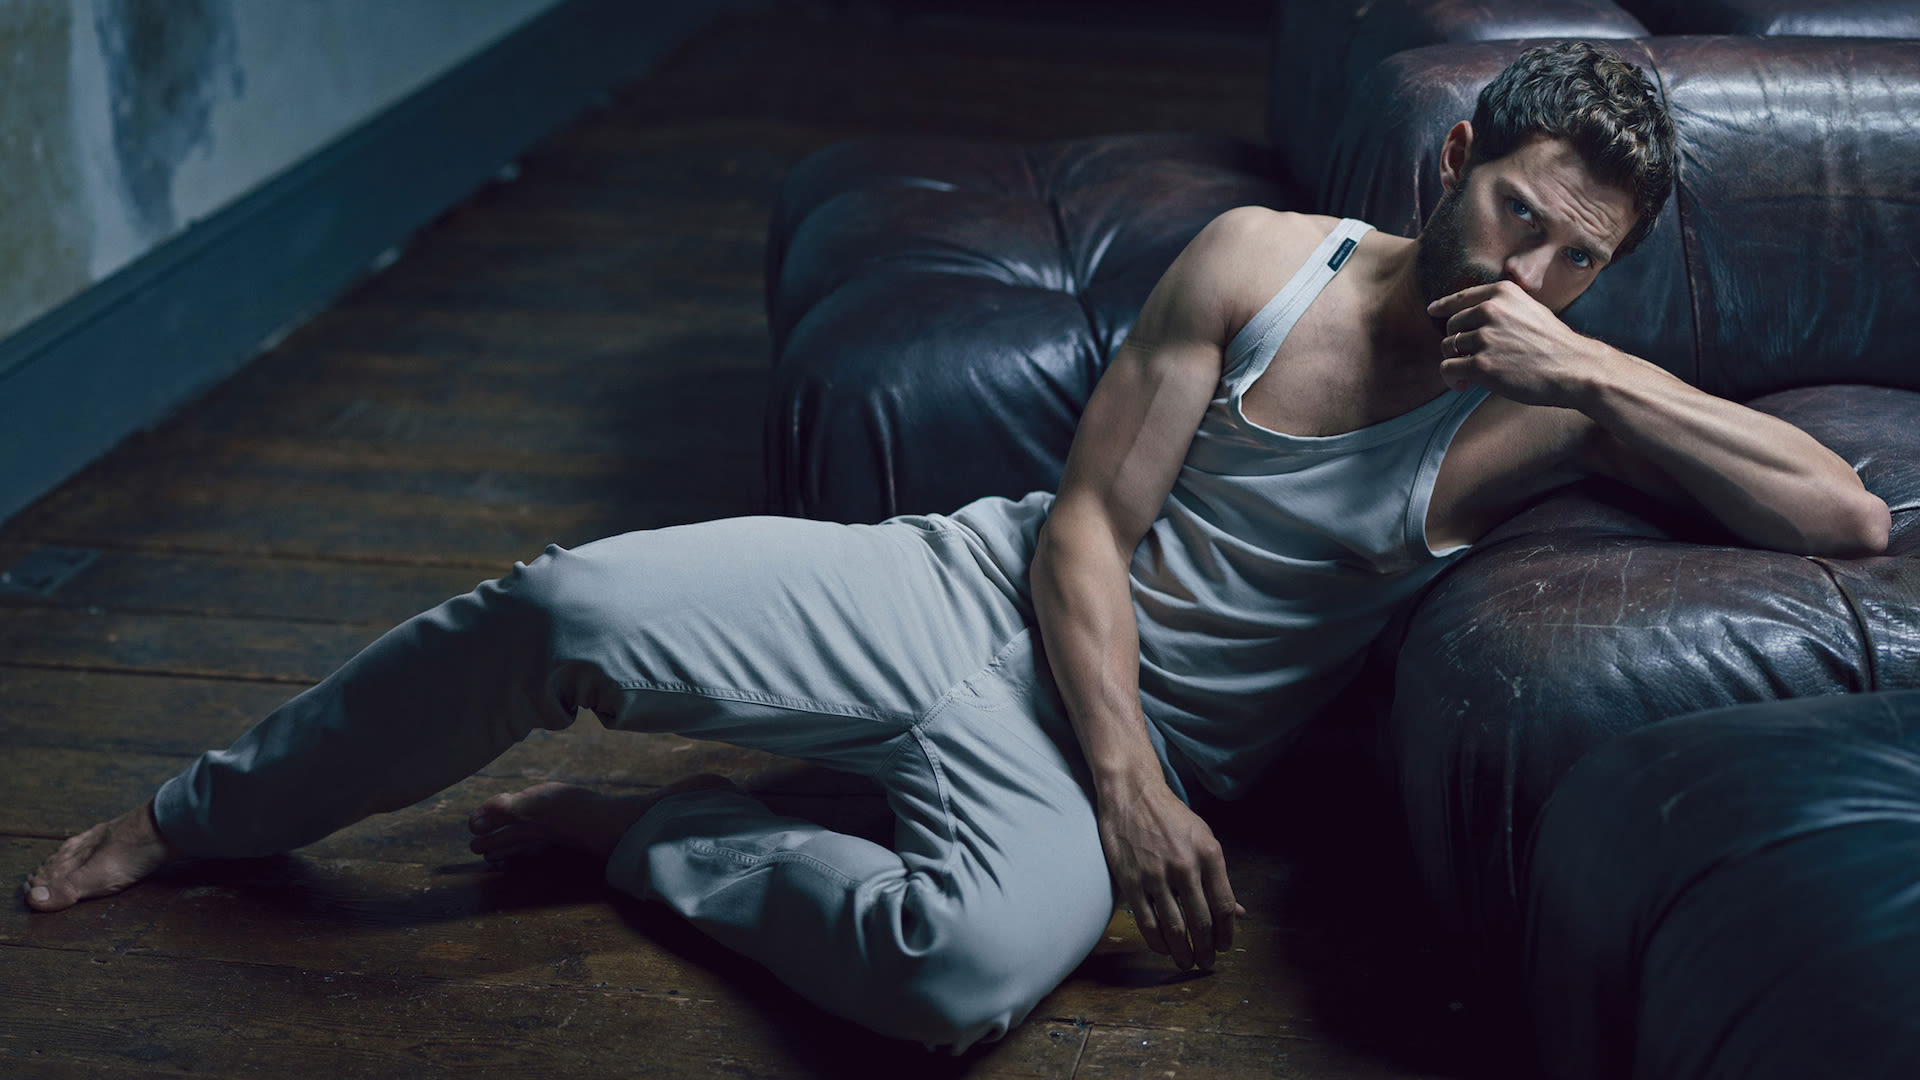 Jamie Dornan: From the Fall to Fifty Shades